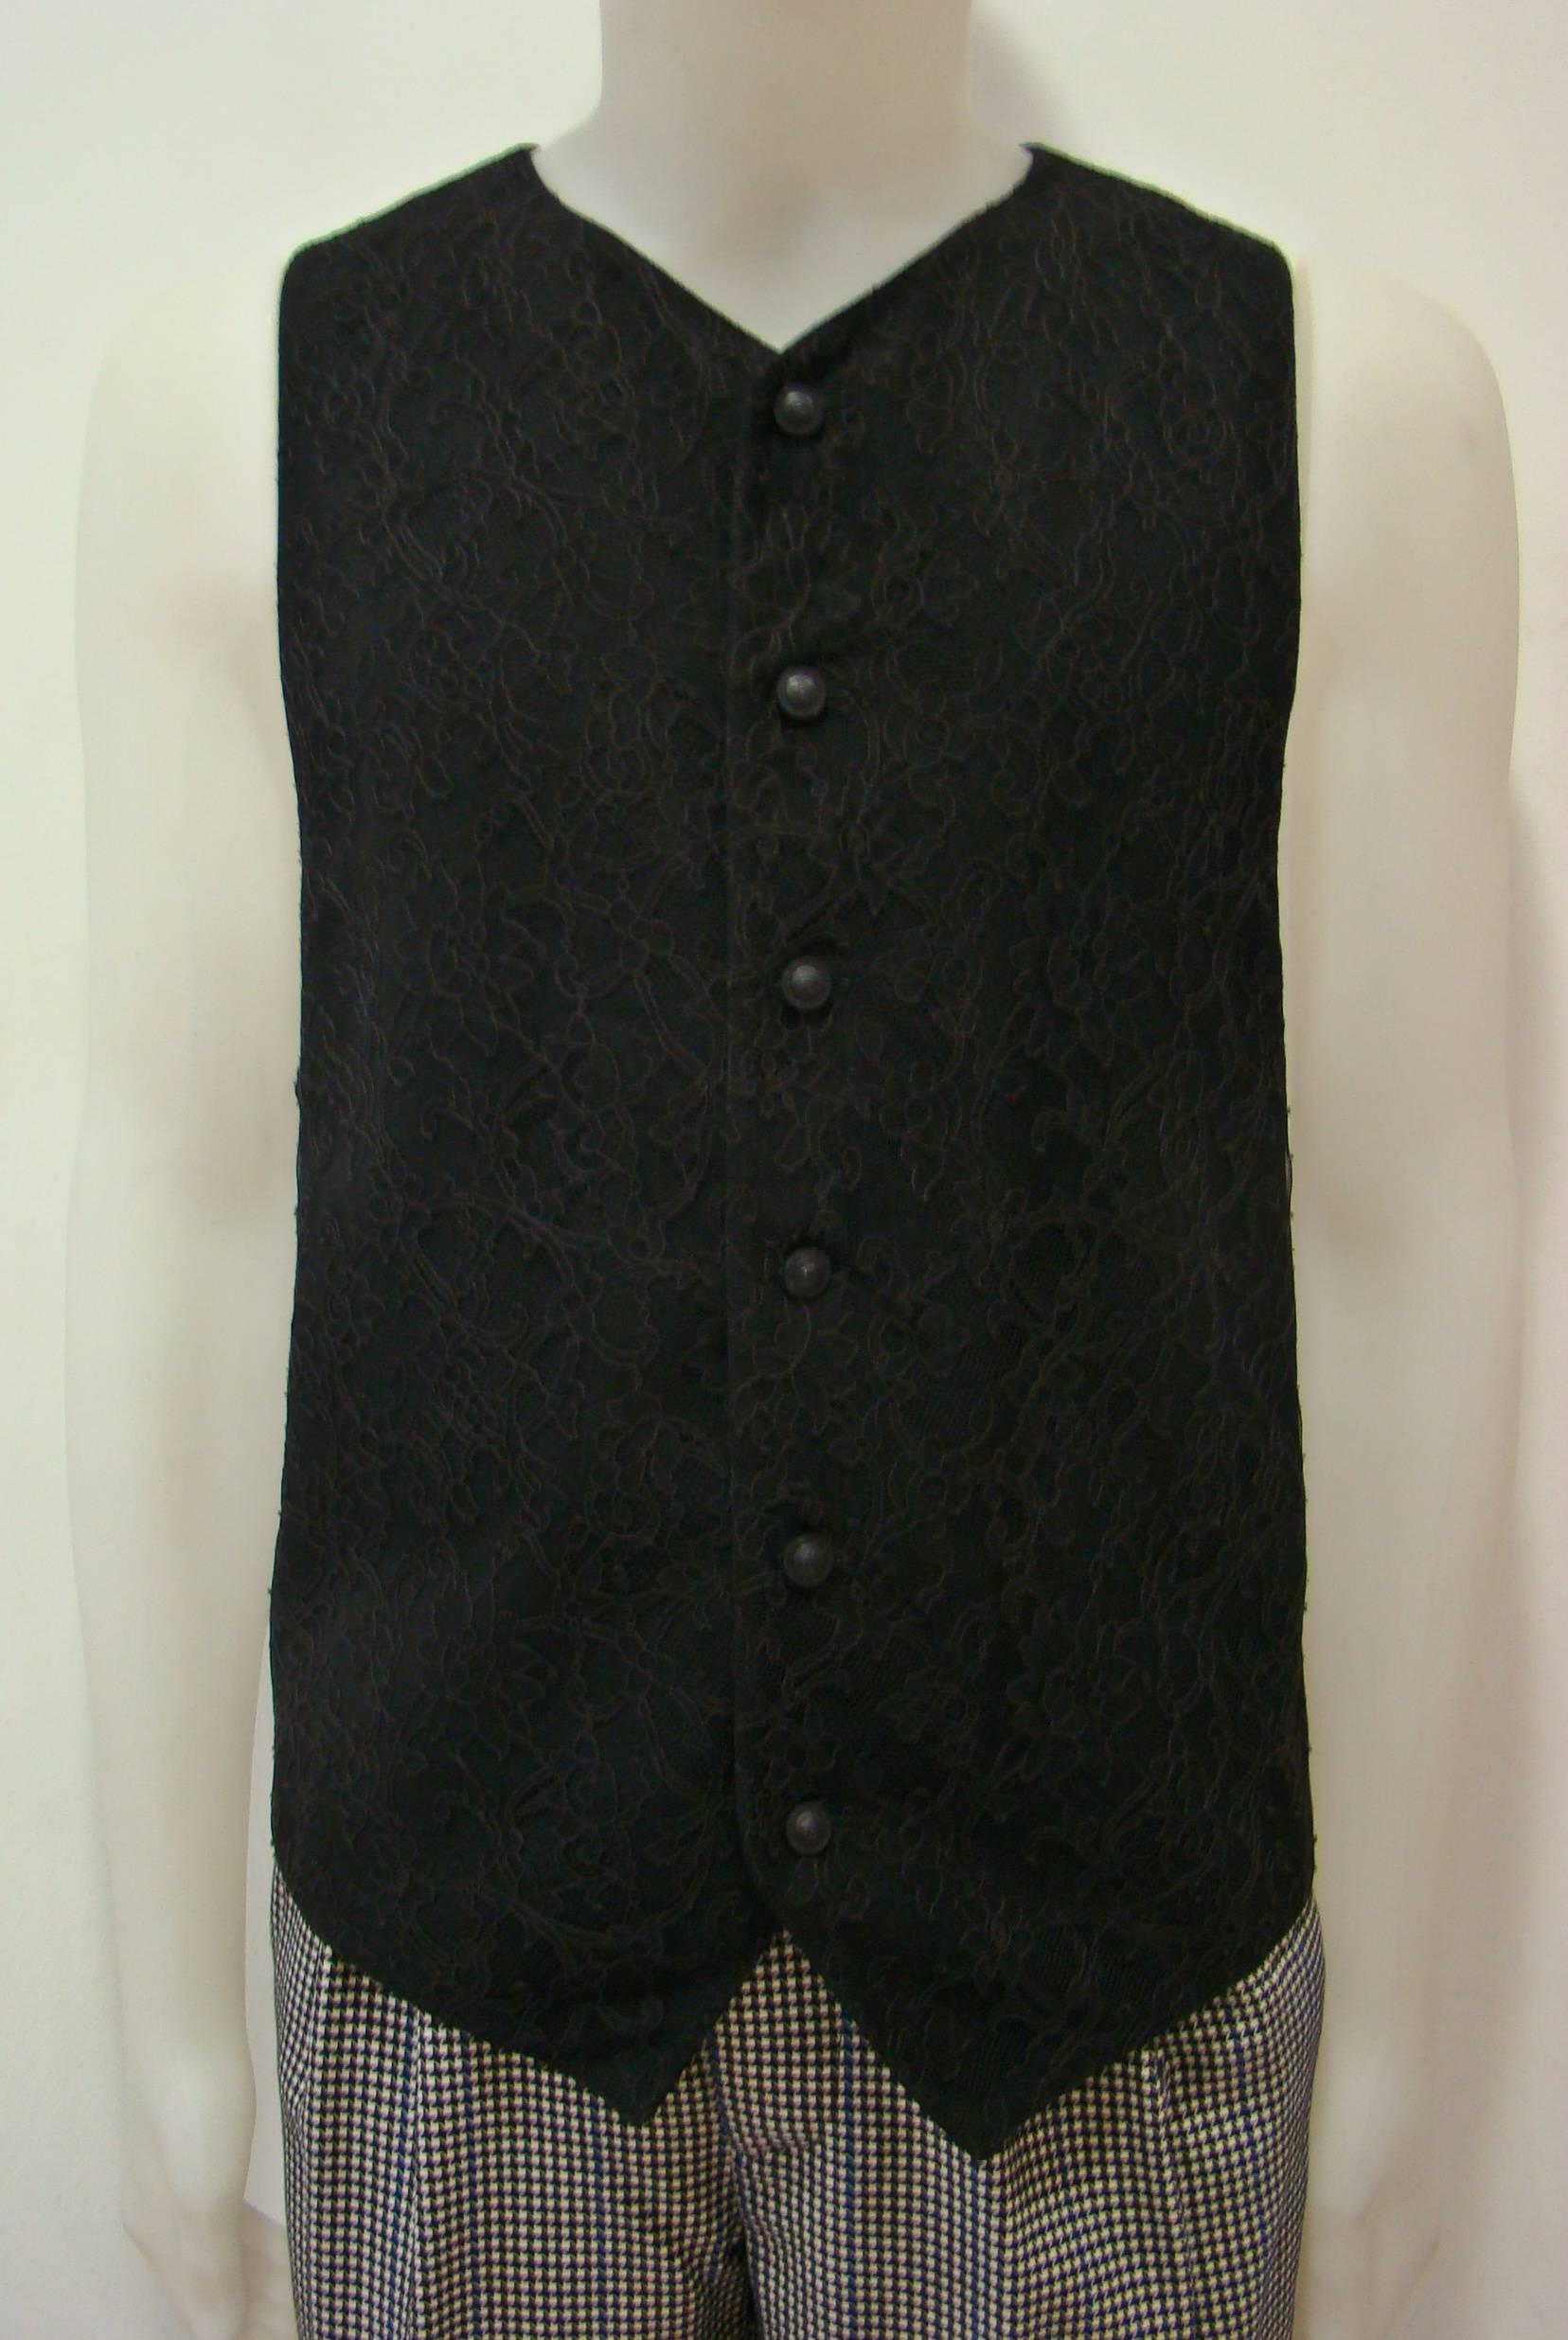 Gianni Versace Lace Waistcoat Vest From Punk Collection Of Spring 1994. 100%Wool Black Vest Featuring Small Black Medusa Buttoning At Front And Fully Lined From The Inside